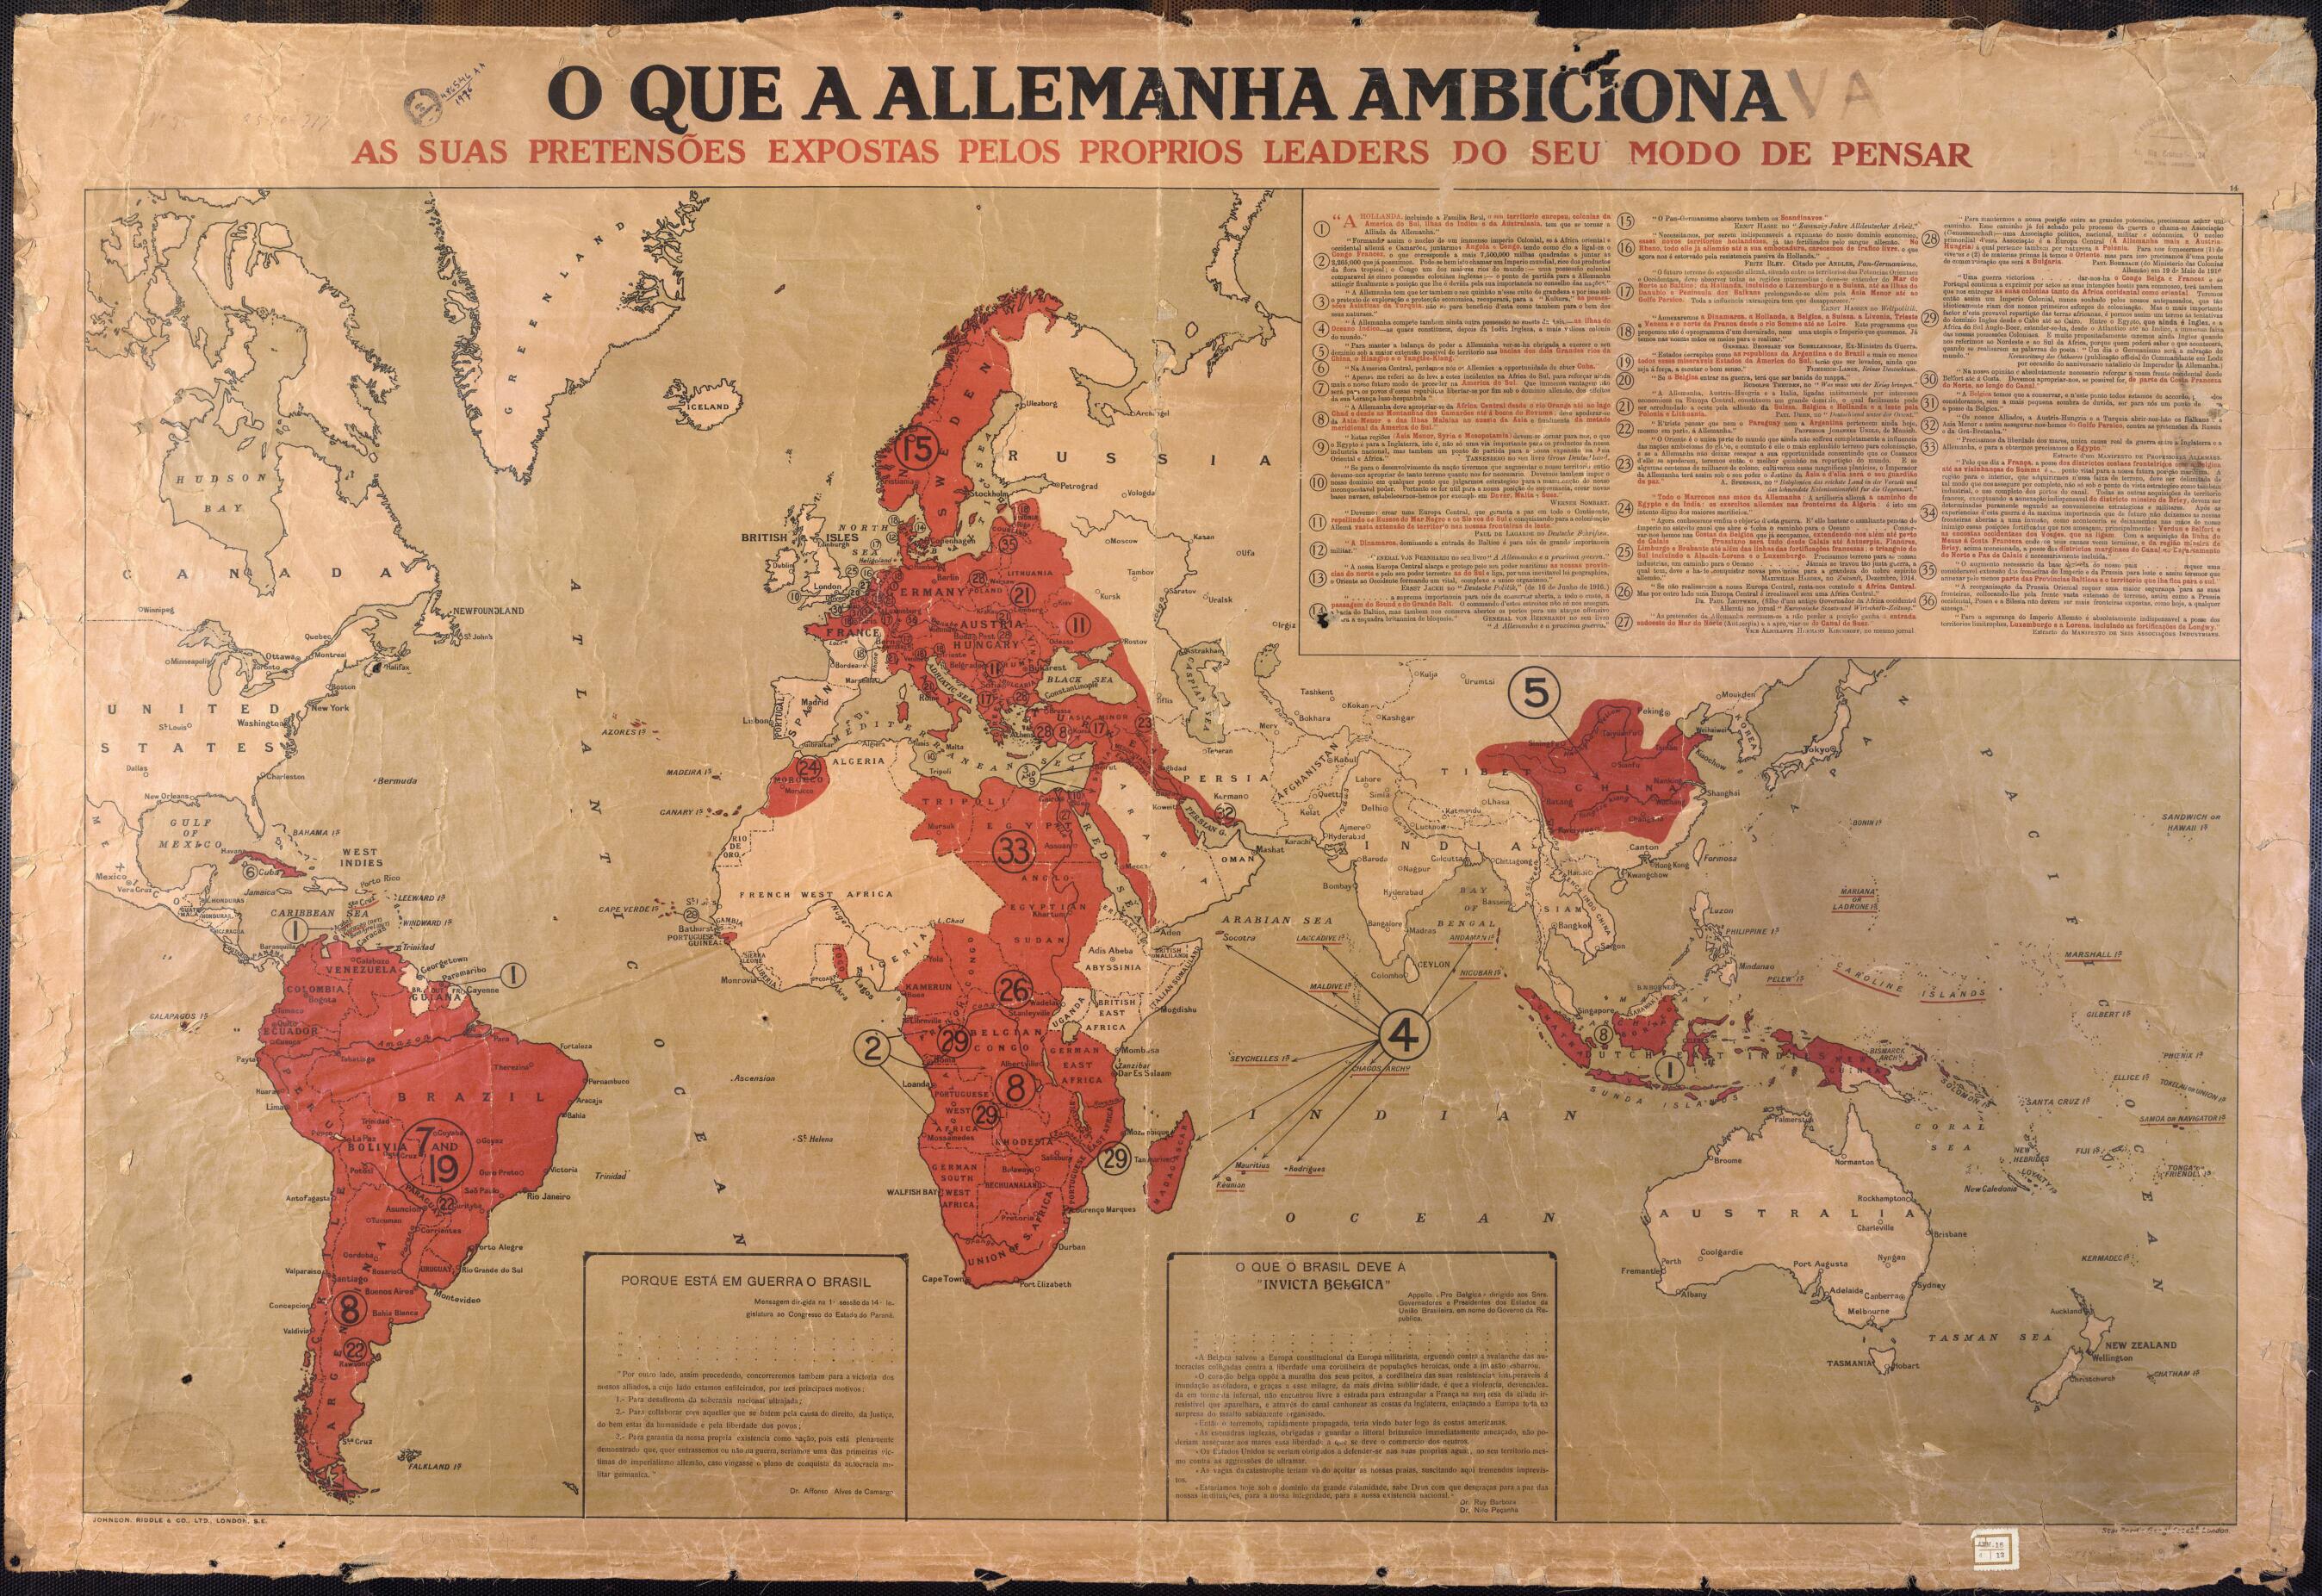 This old map of What Germany Desires. Its Ambitions Exposed by the Thinking of Its Leaders. (O Que a Allemanha Ambiciona. As Suas Pretensões Expostas Pelos Proprios Leaders Do Seu Modo De Pensar) from 1914 was created by  in 1914